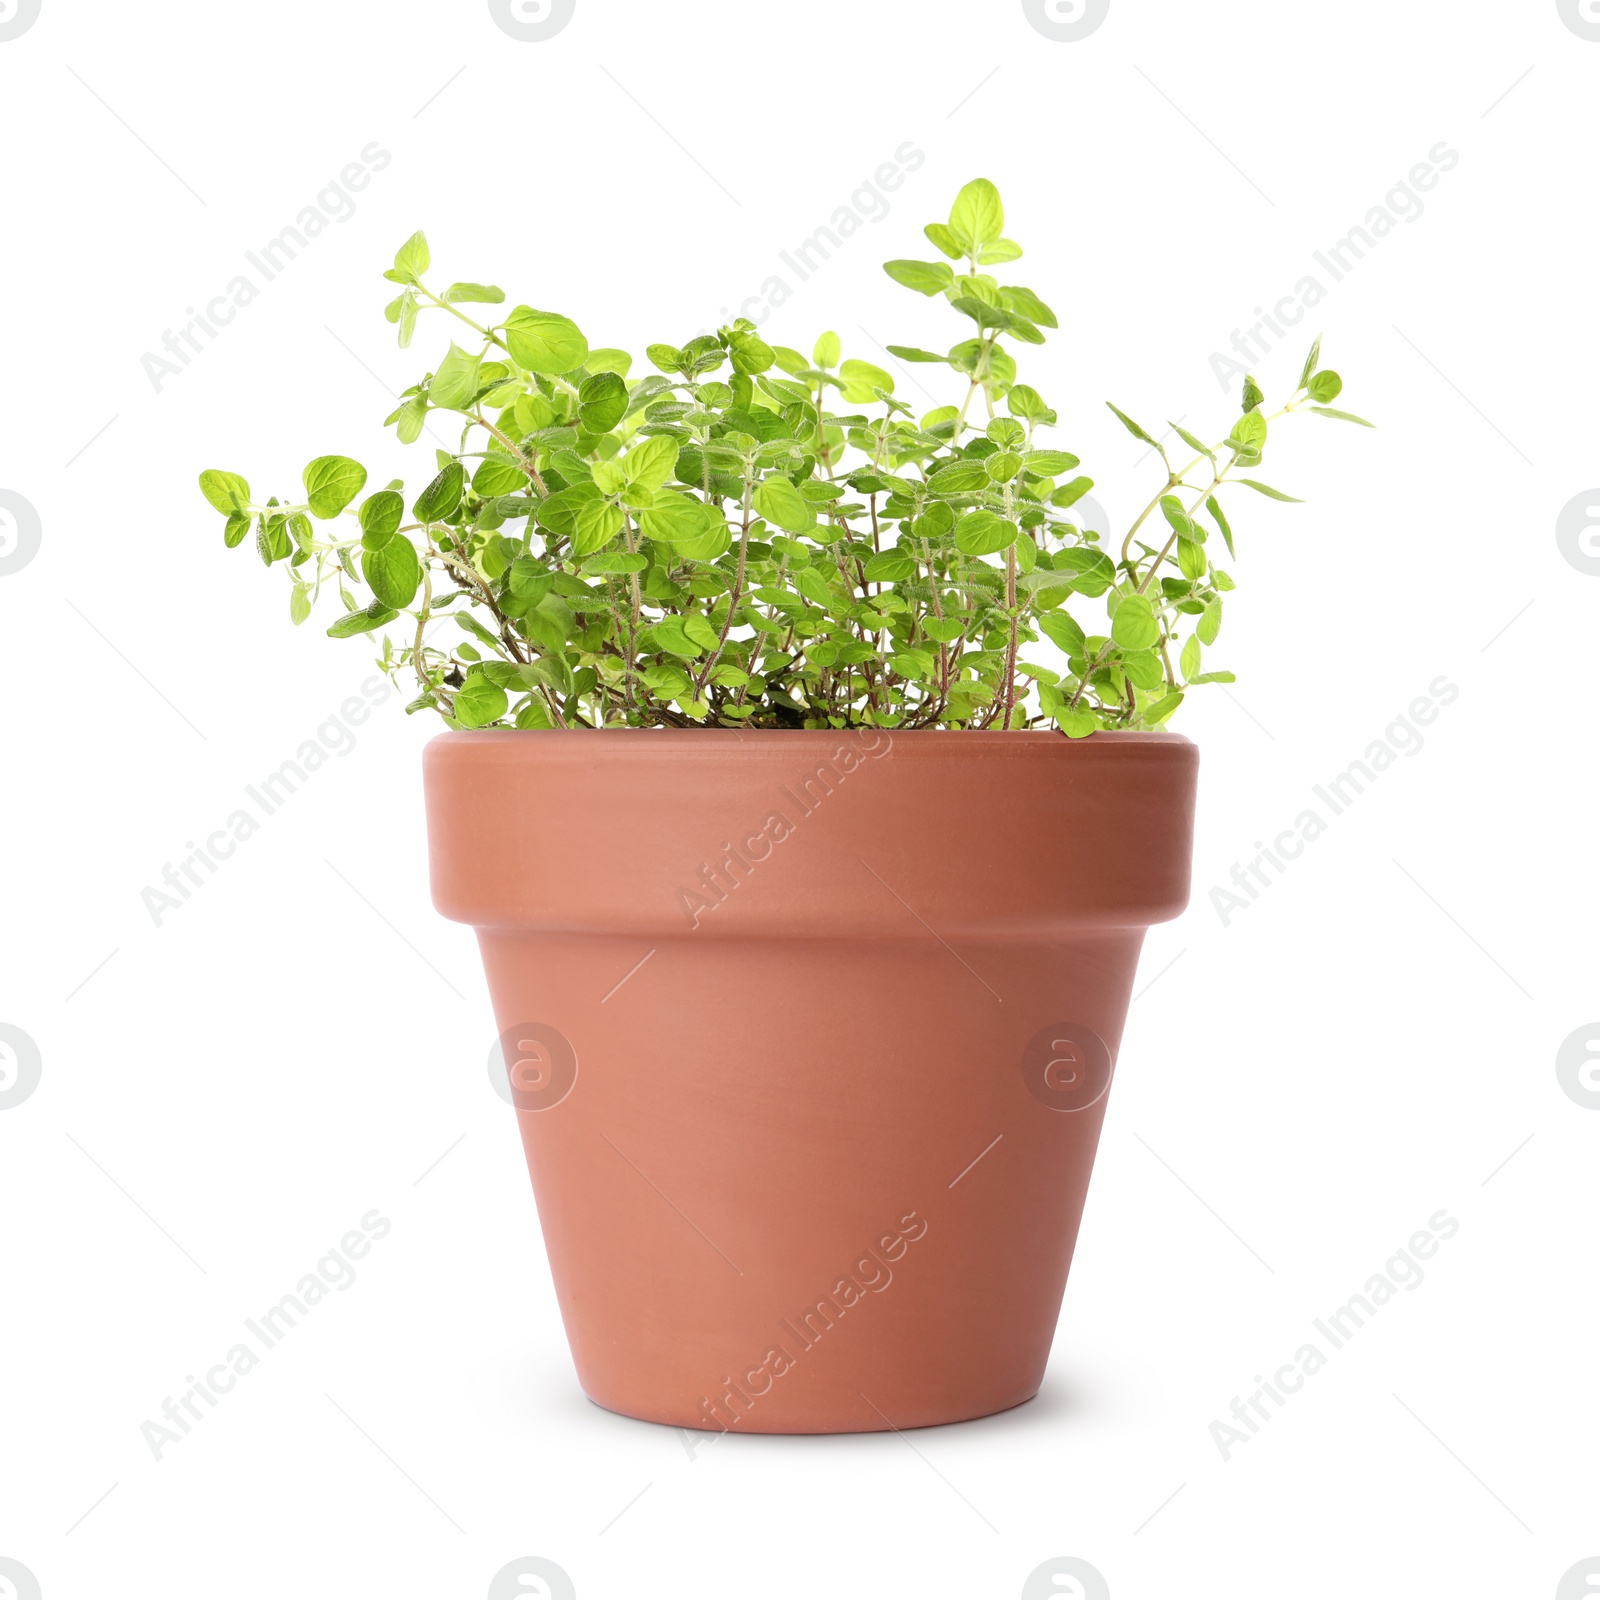 Image of Green oregano in clay pot isolated on white